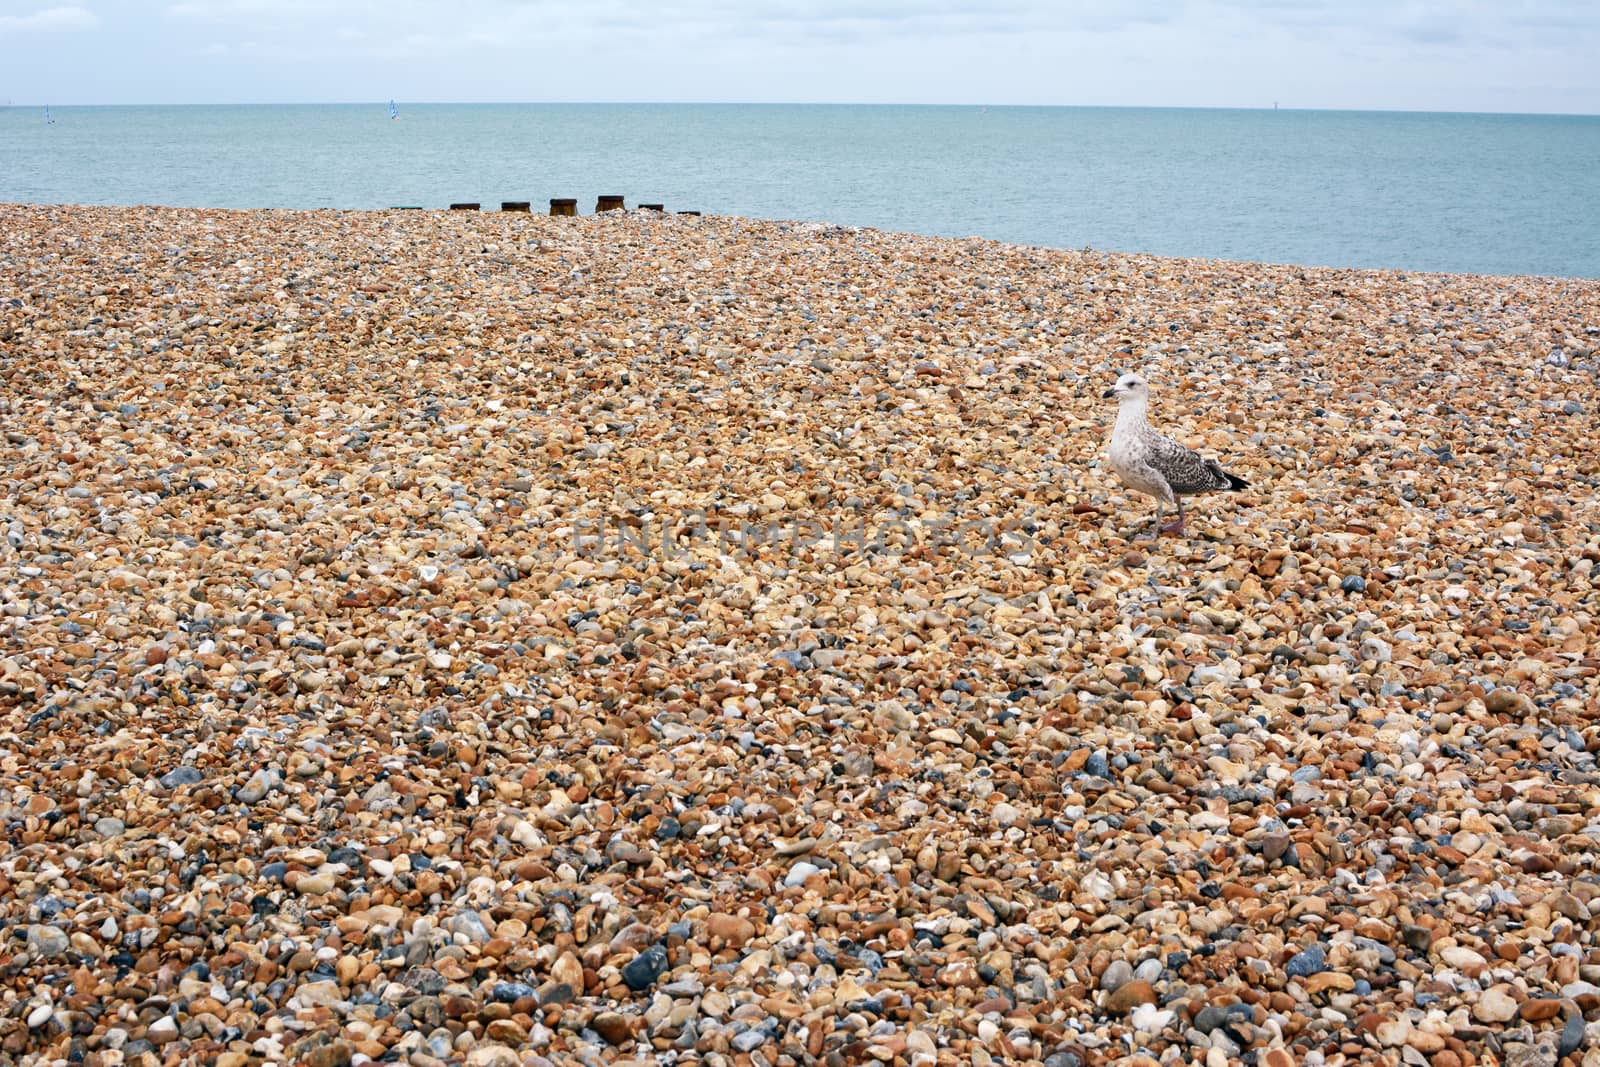 Seagull walks across shingle beach in Eastbourne, East Sussex in the United Kingdom